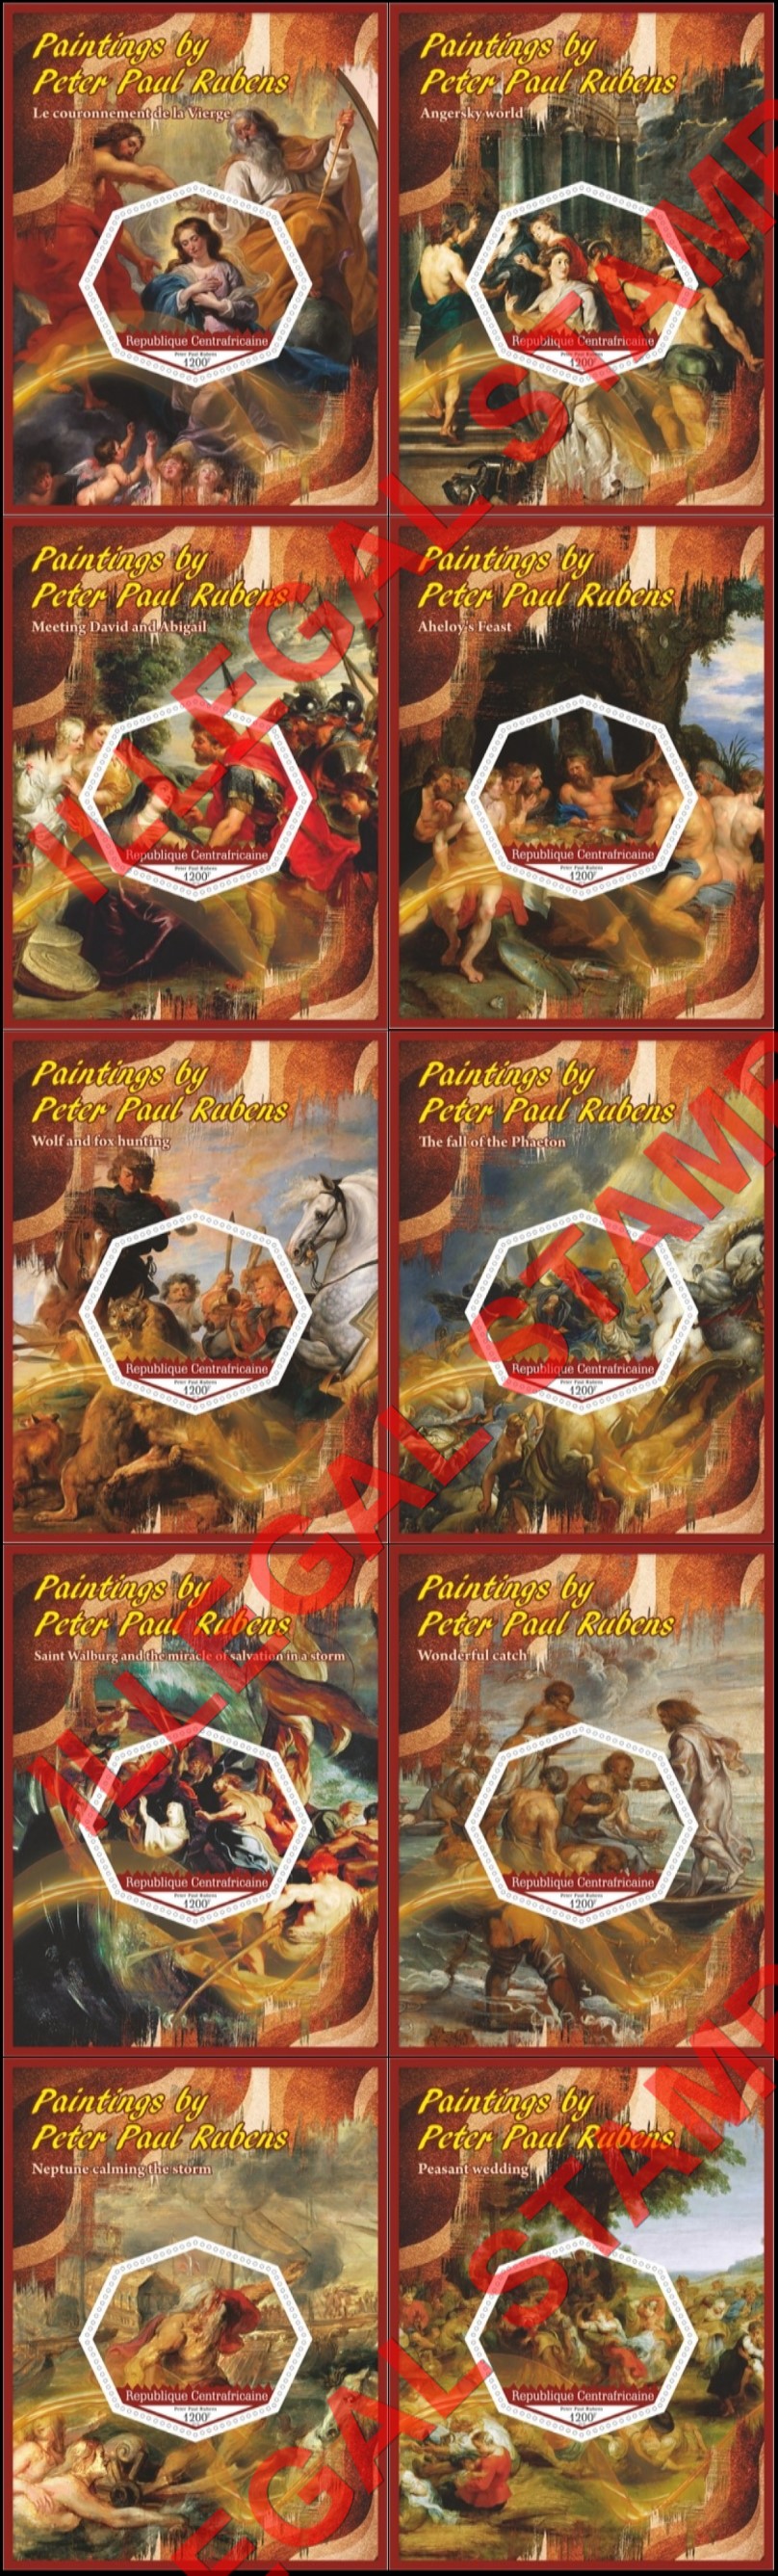 Central African Republic 2019 Paintings by Peter Paul Rubens Illegal Stamp Souvenir Sheets of 1